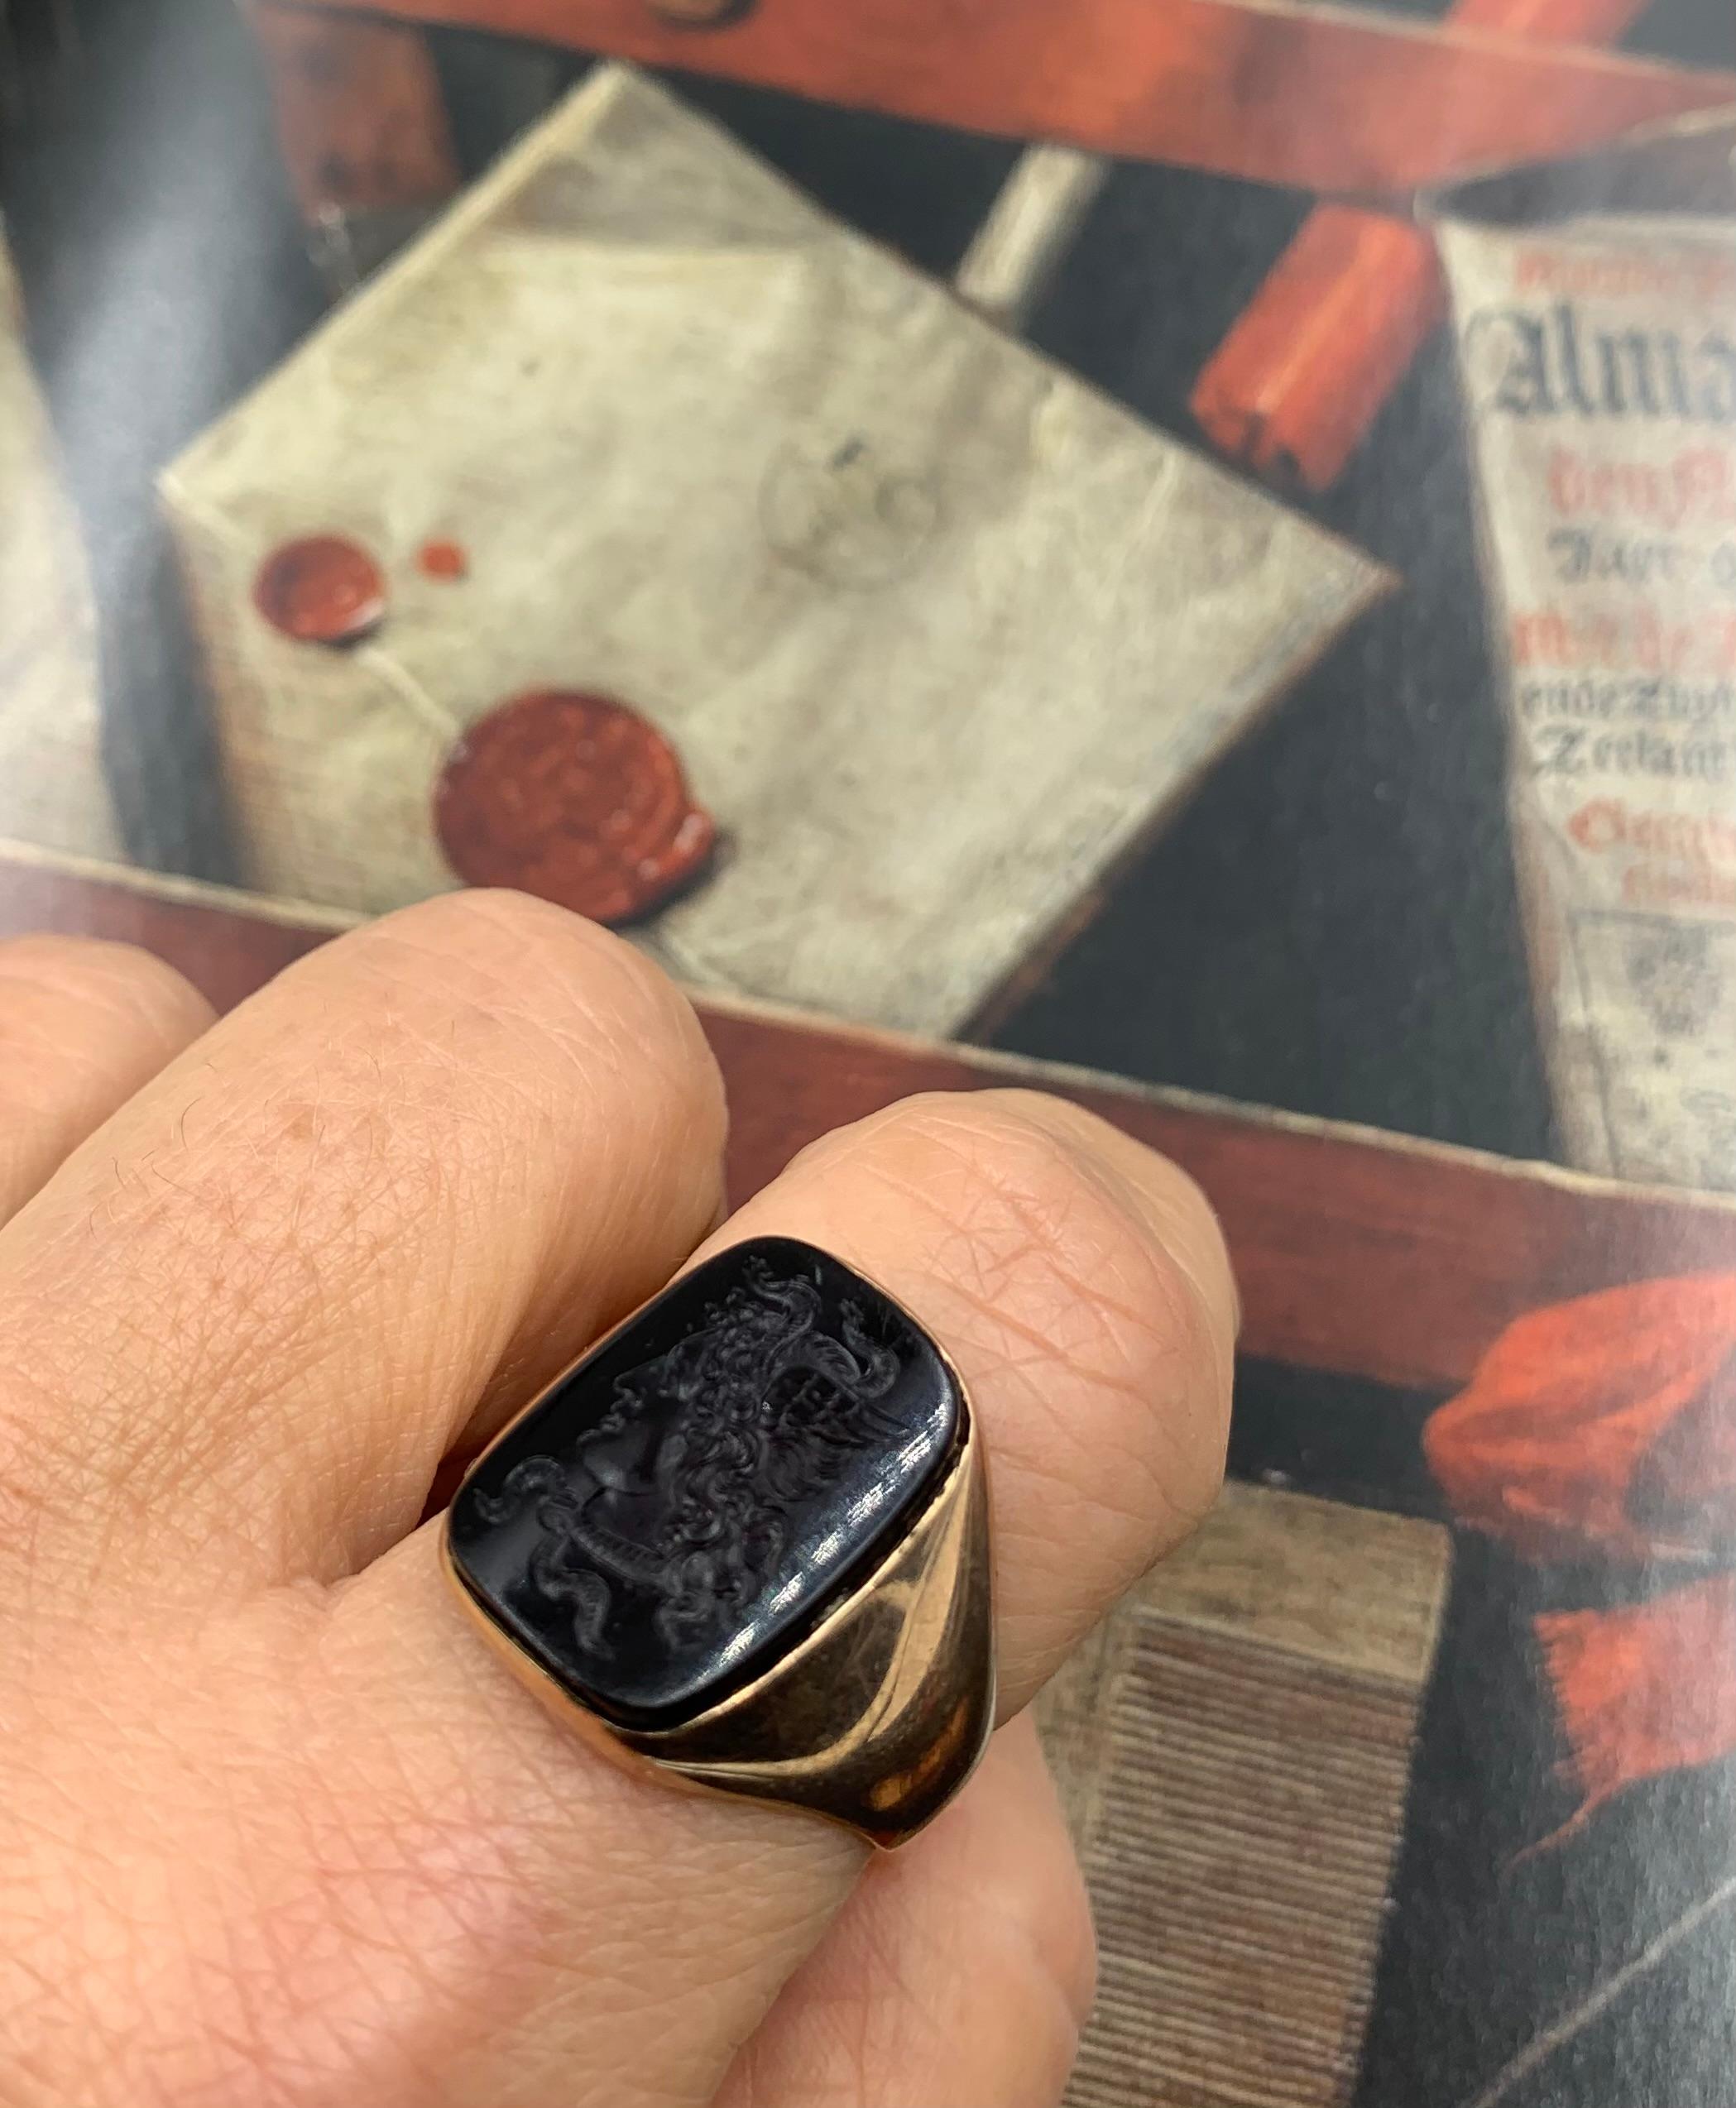 Impressive Georgian period 14K yellow gold onyx intaglio signet ring depicting Medusa.
Early 19th Century
The story of Medusa is one of the best known in Greek mythology. It is most appropriate that her image appears on a Georgian era signet ring as